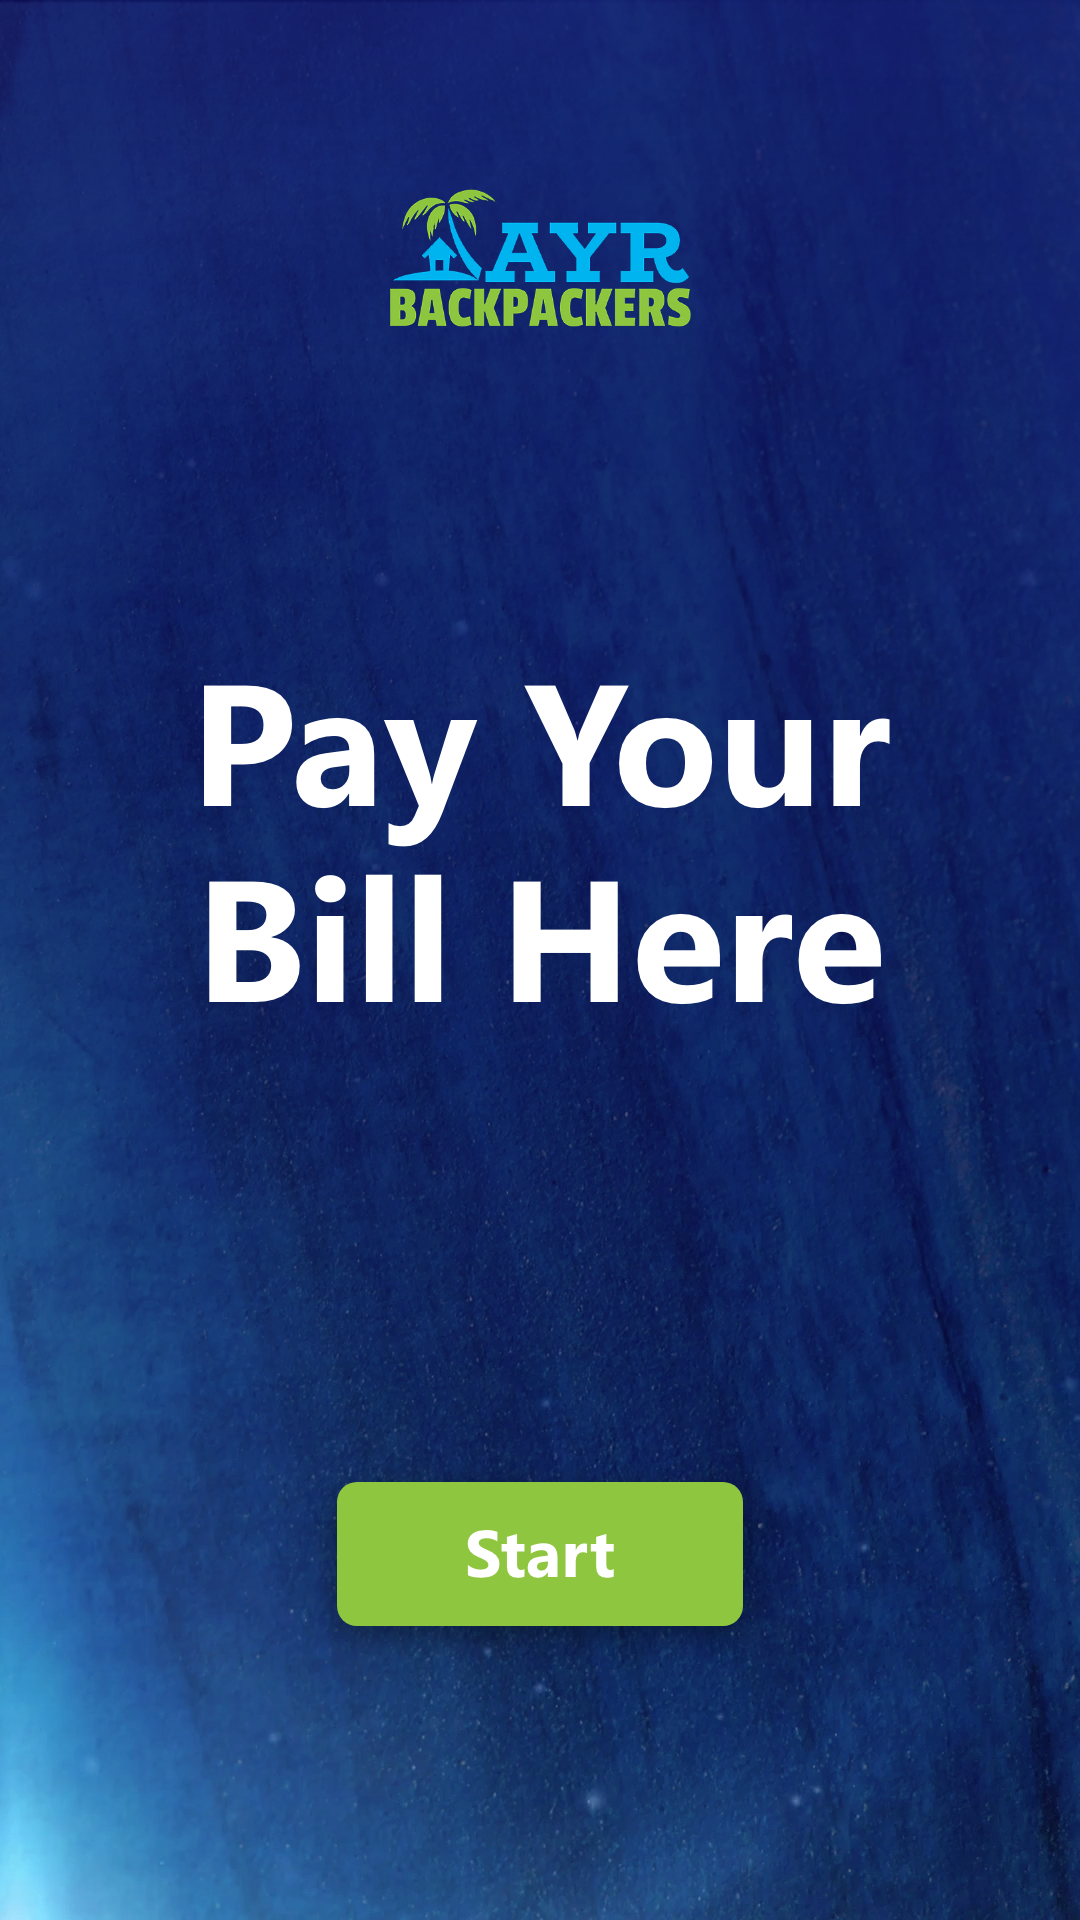 The kiosk’s animated idle screen, with the text “Pay Your Bill Here” shown prominently